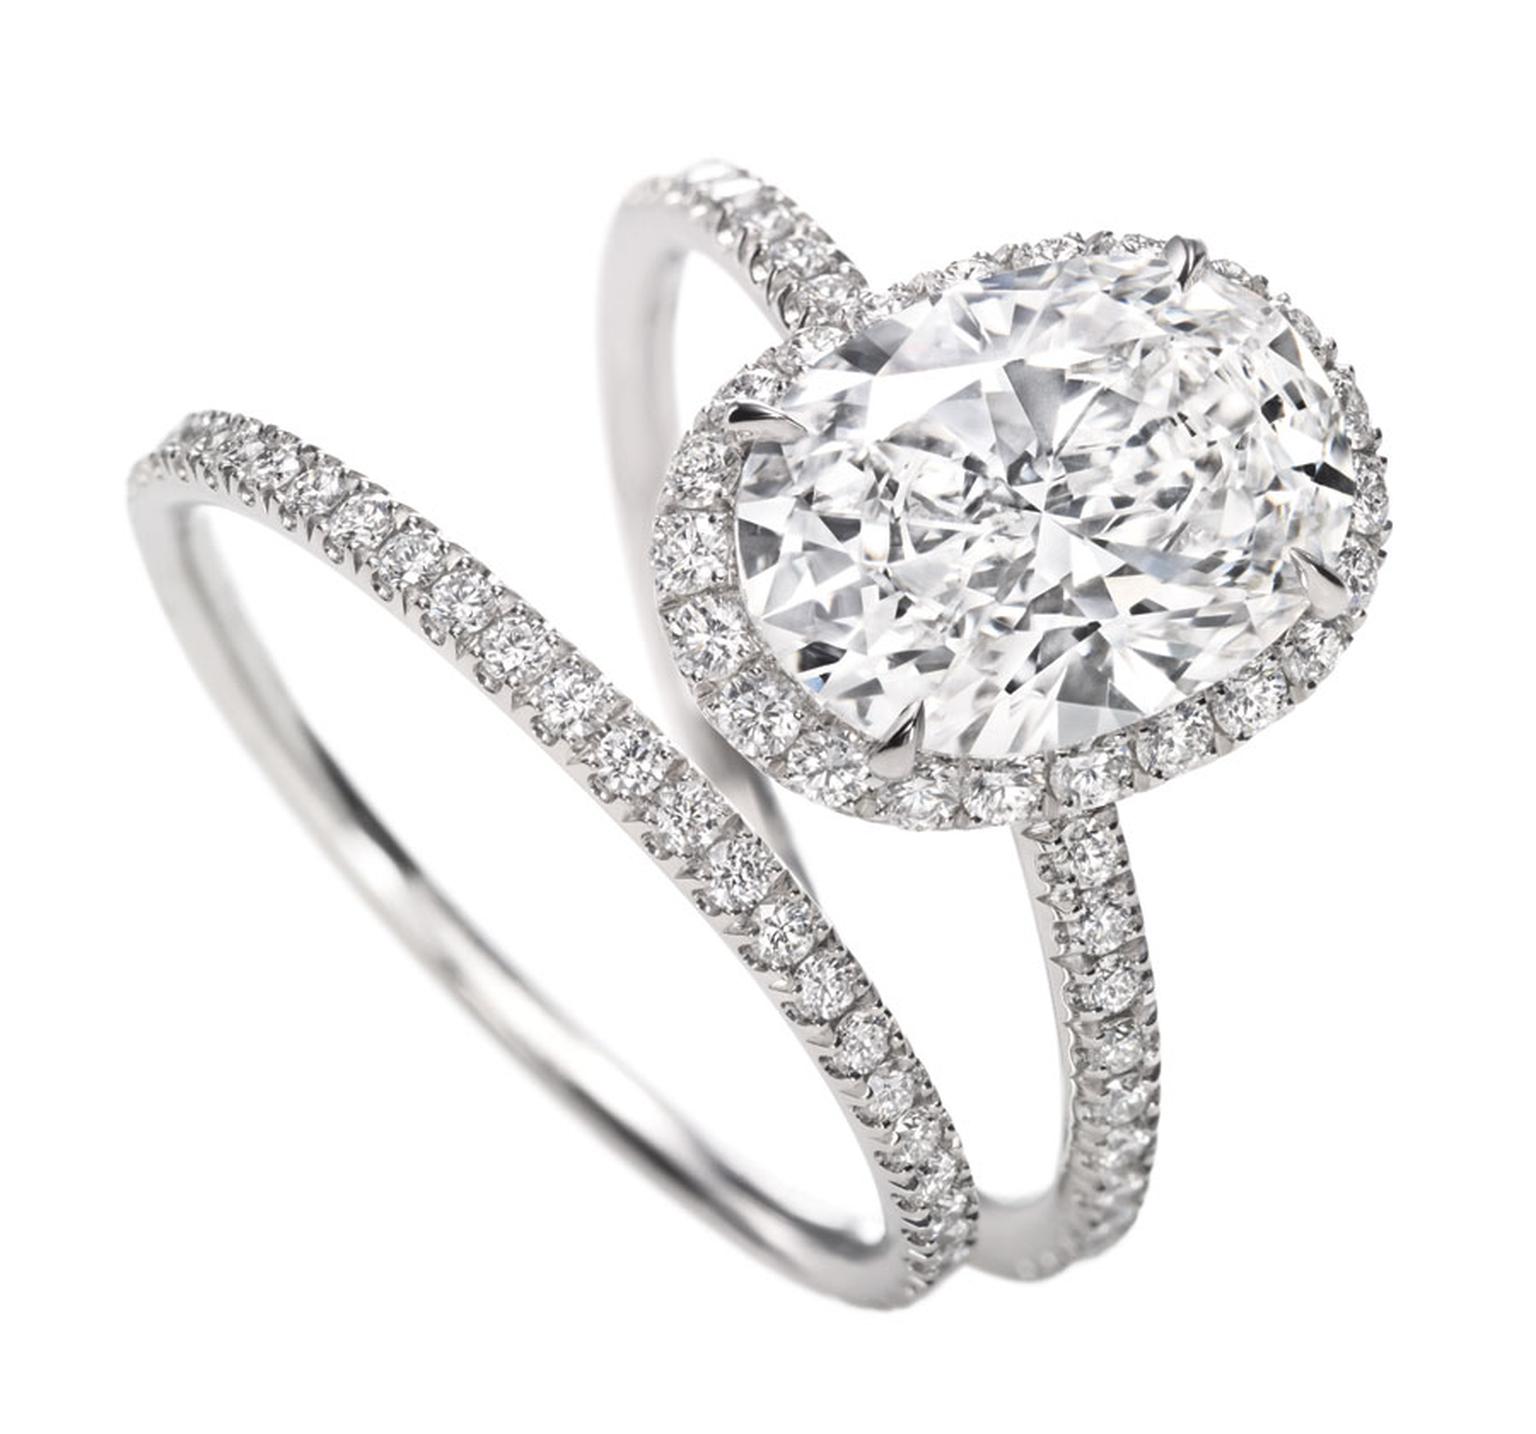 Harry Winston. Oval Micropave Diamond Ring and Micropave Diamond Band.